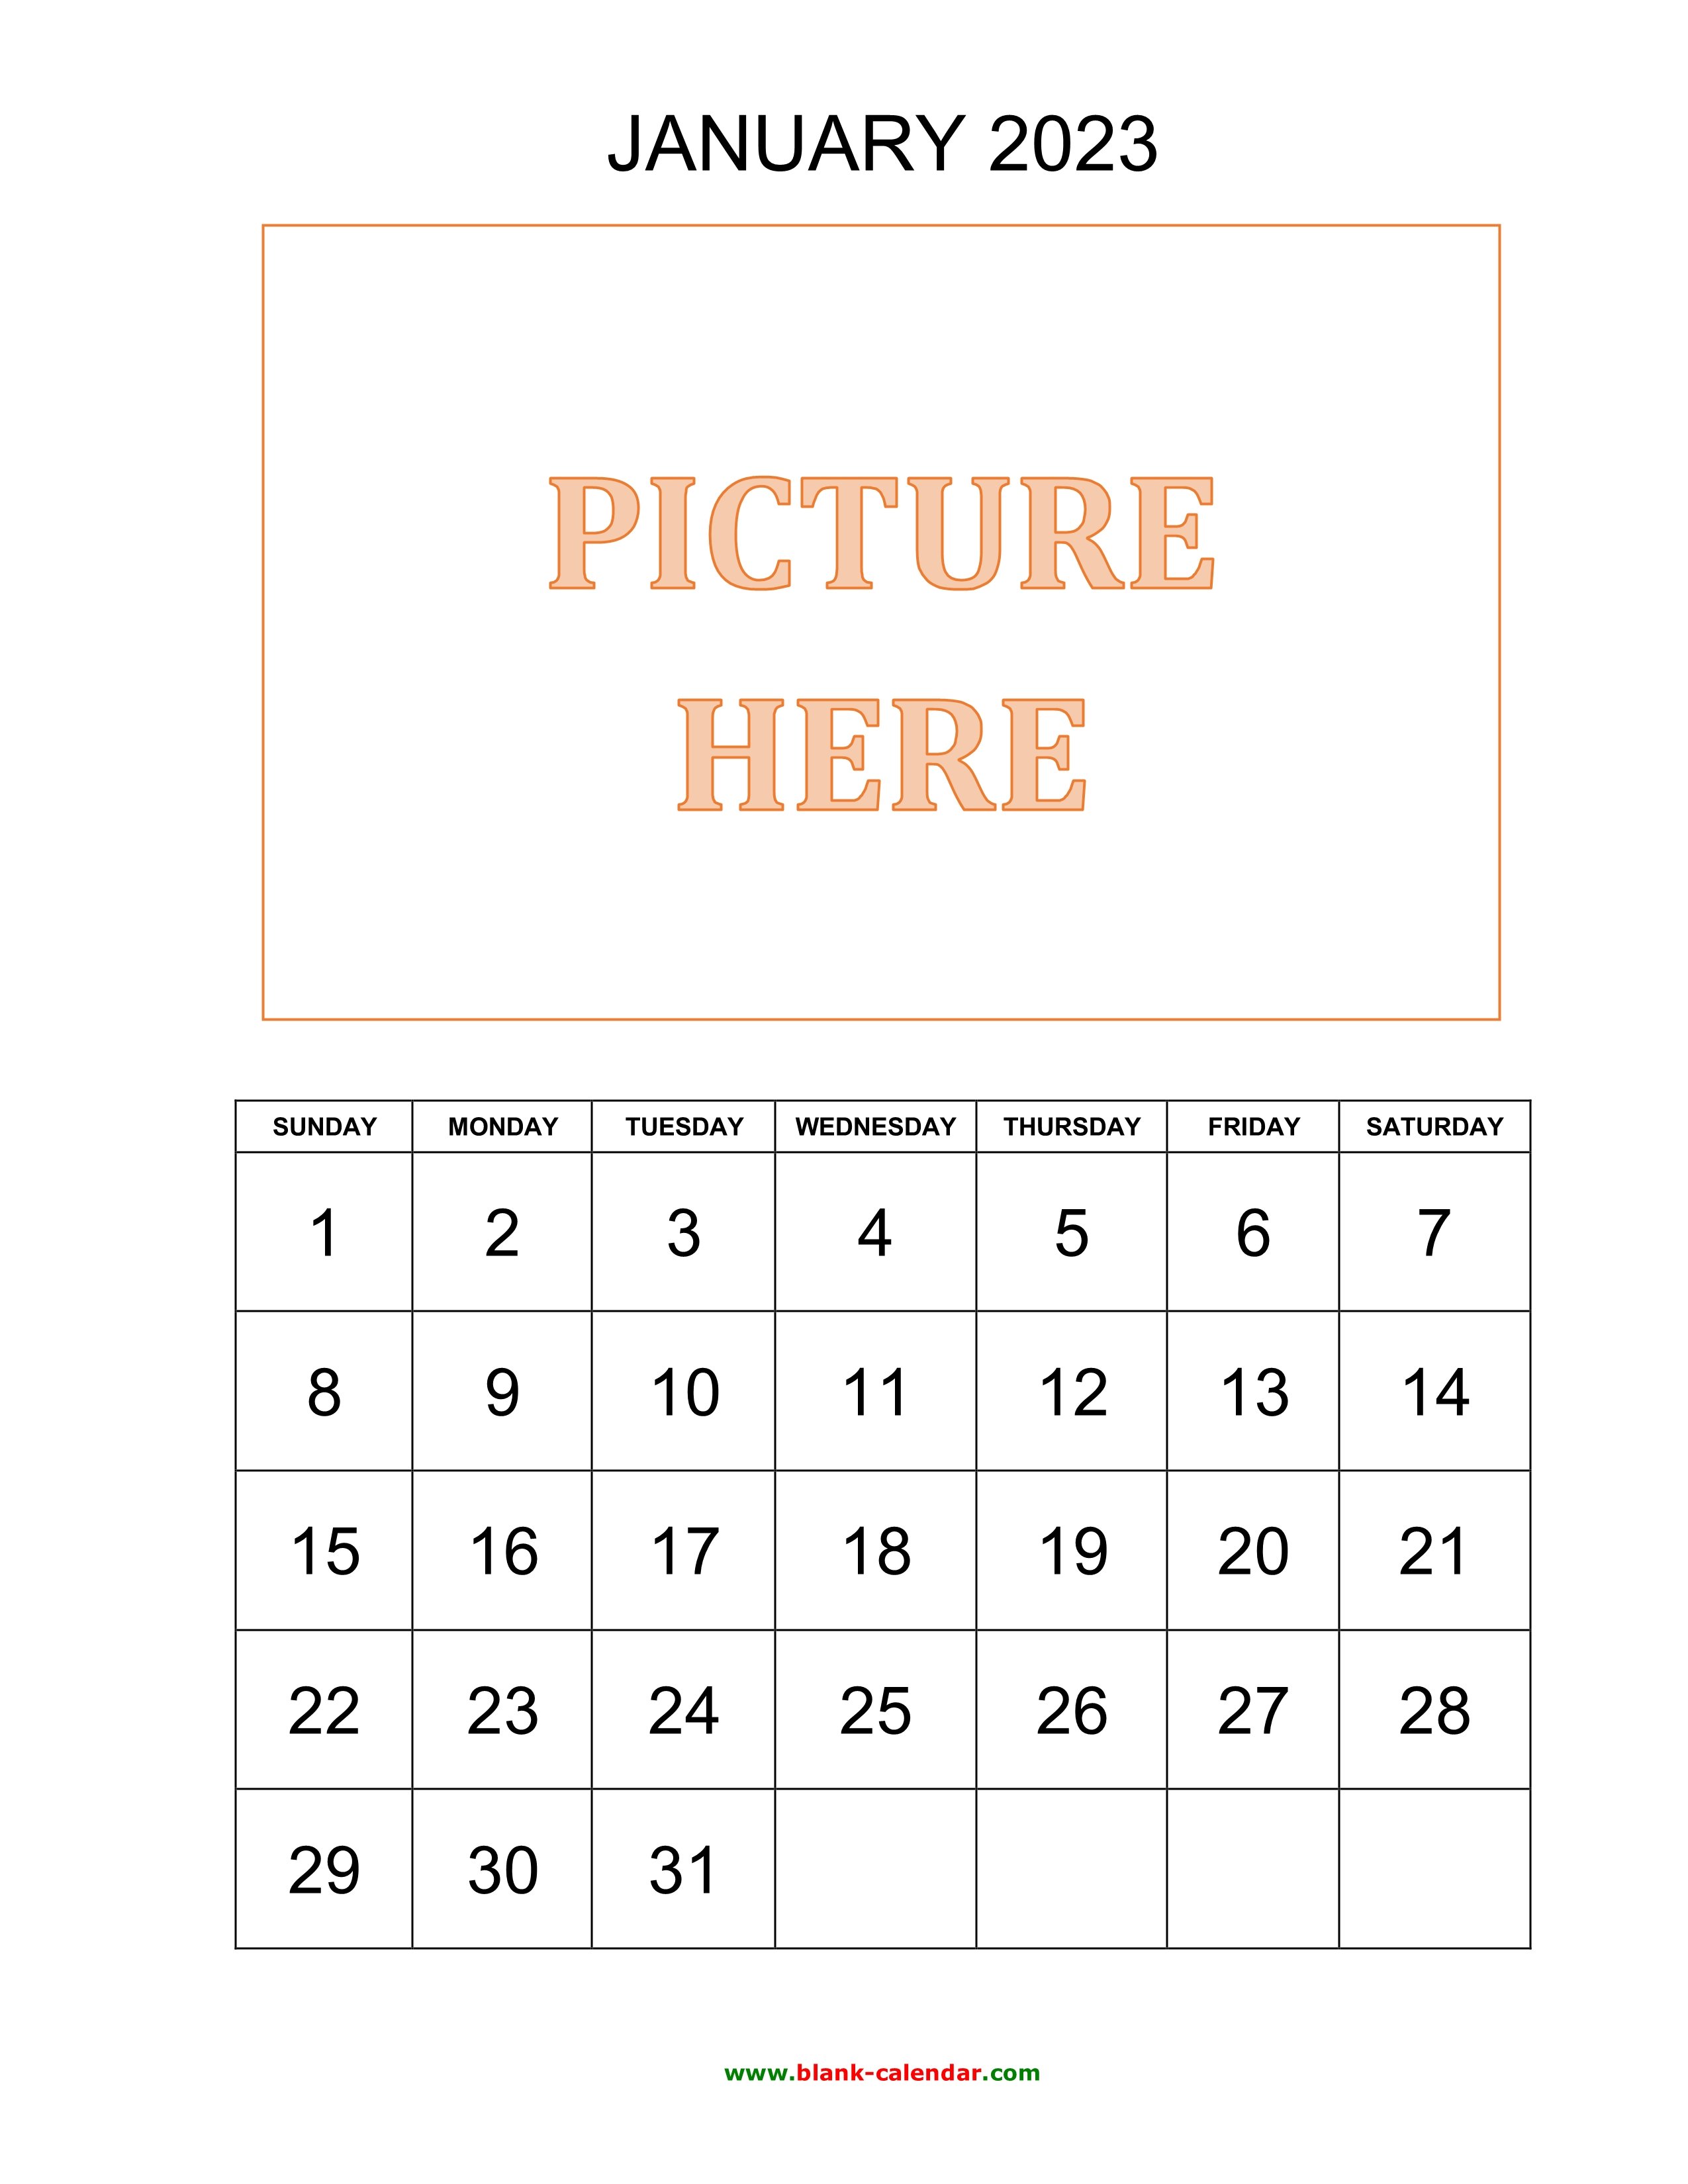 Free Download Printable January 2023 Calendar, pictures can be placed at the top